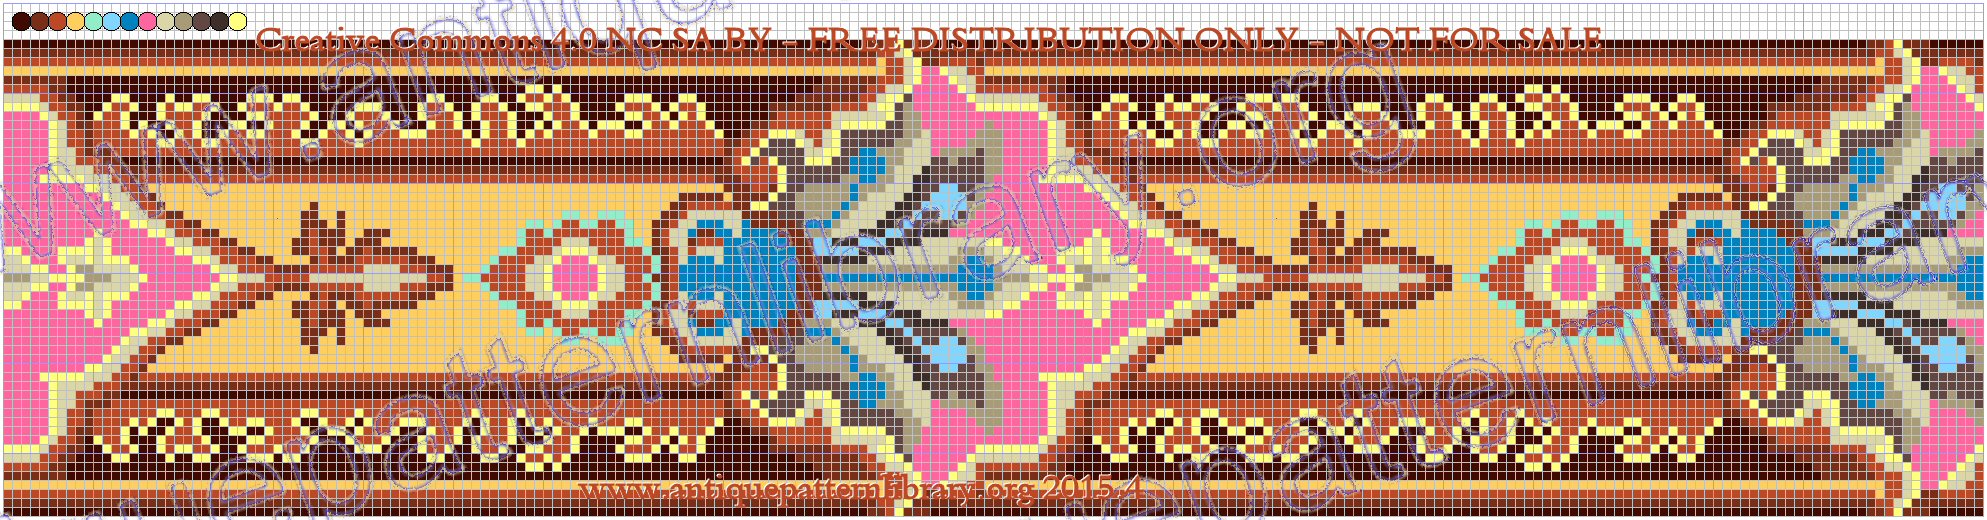 E-CW002 Antique French Needlepoint Embroidery